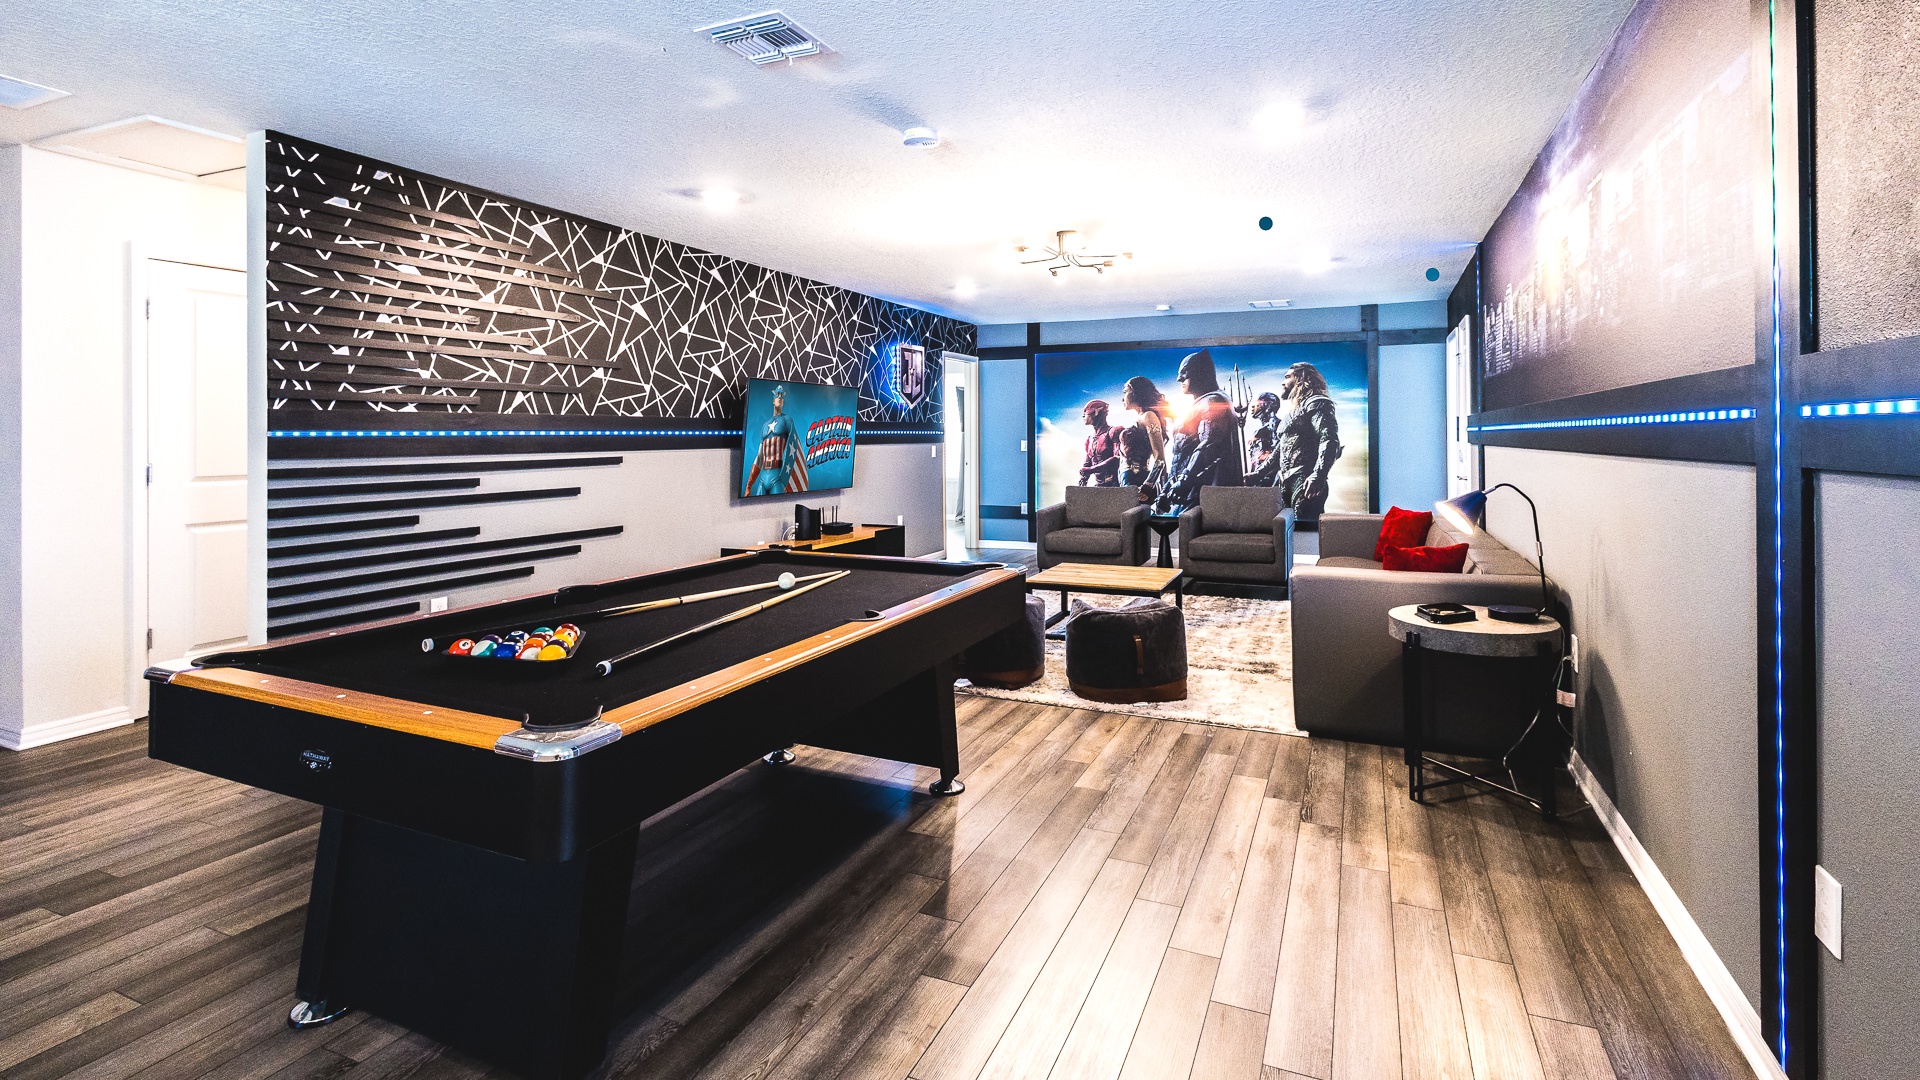 Watch your favorite movie or play some pool in the super hero themed game room